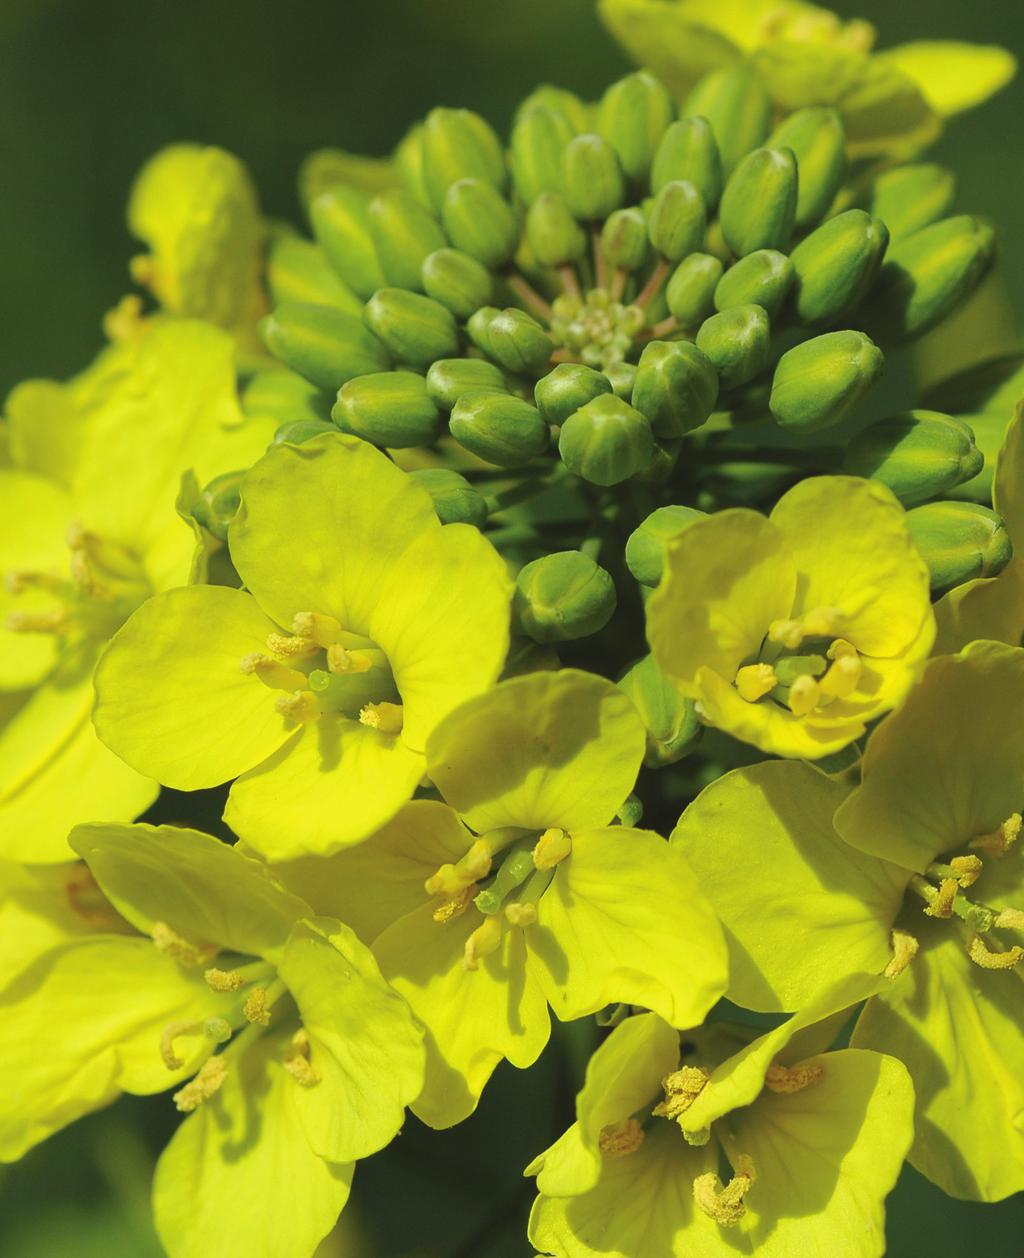 Spring Hybrid Oilseed Rape Spring Hybrid Oilseed Rape Why choose a hybrid for the spring? Hybrids offer consistency of performance and reliability over conventional varieties.